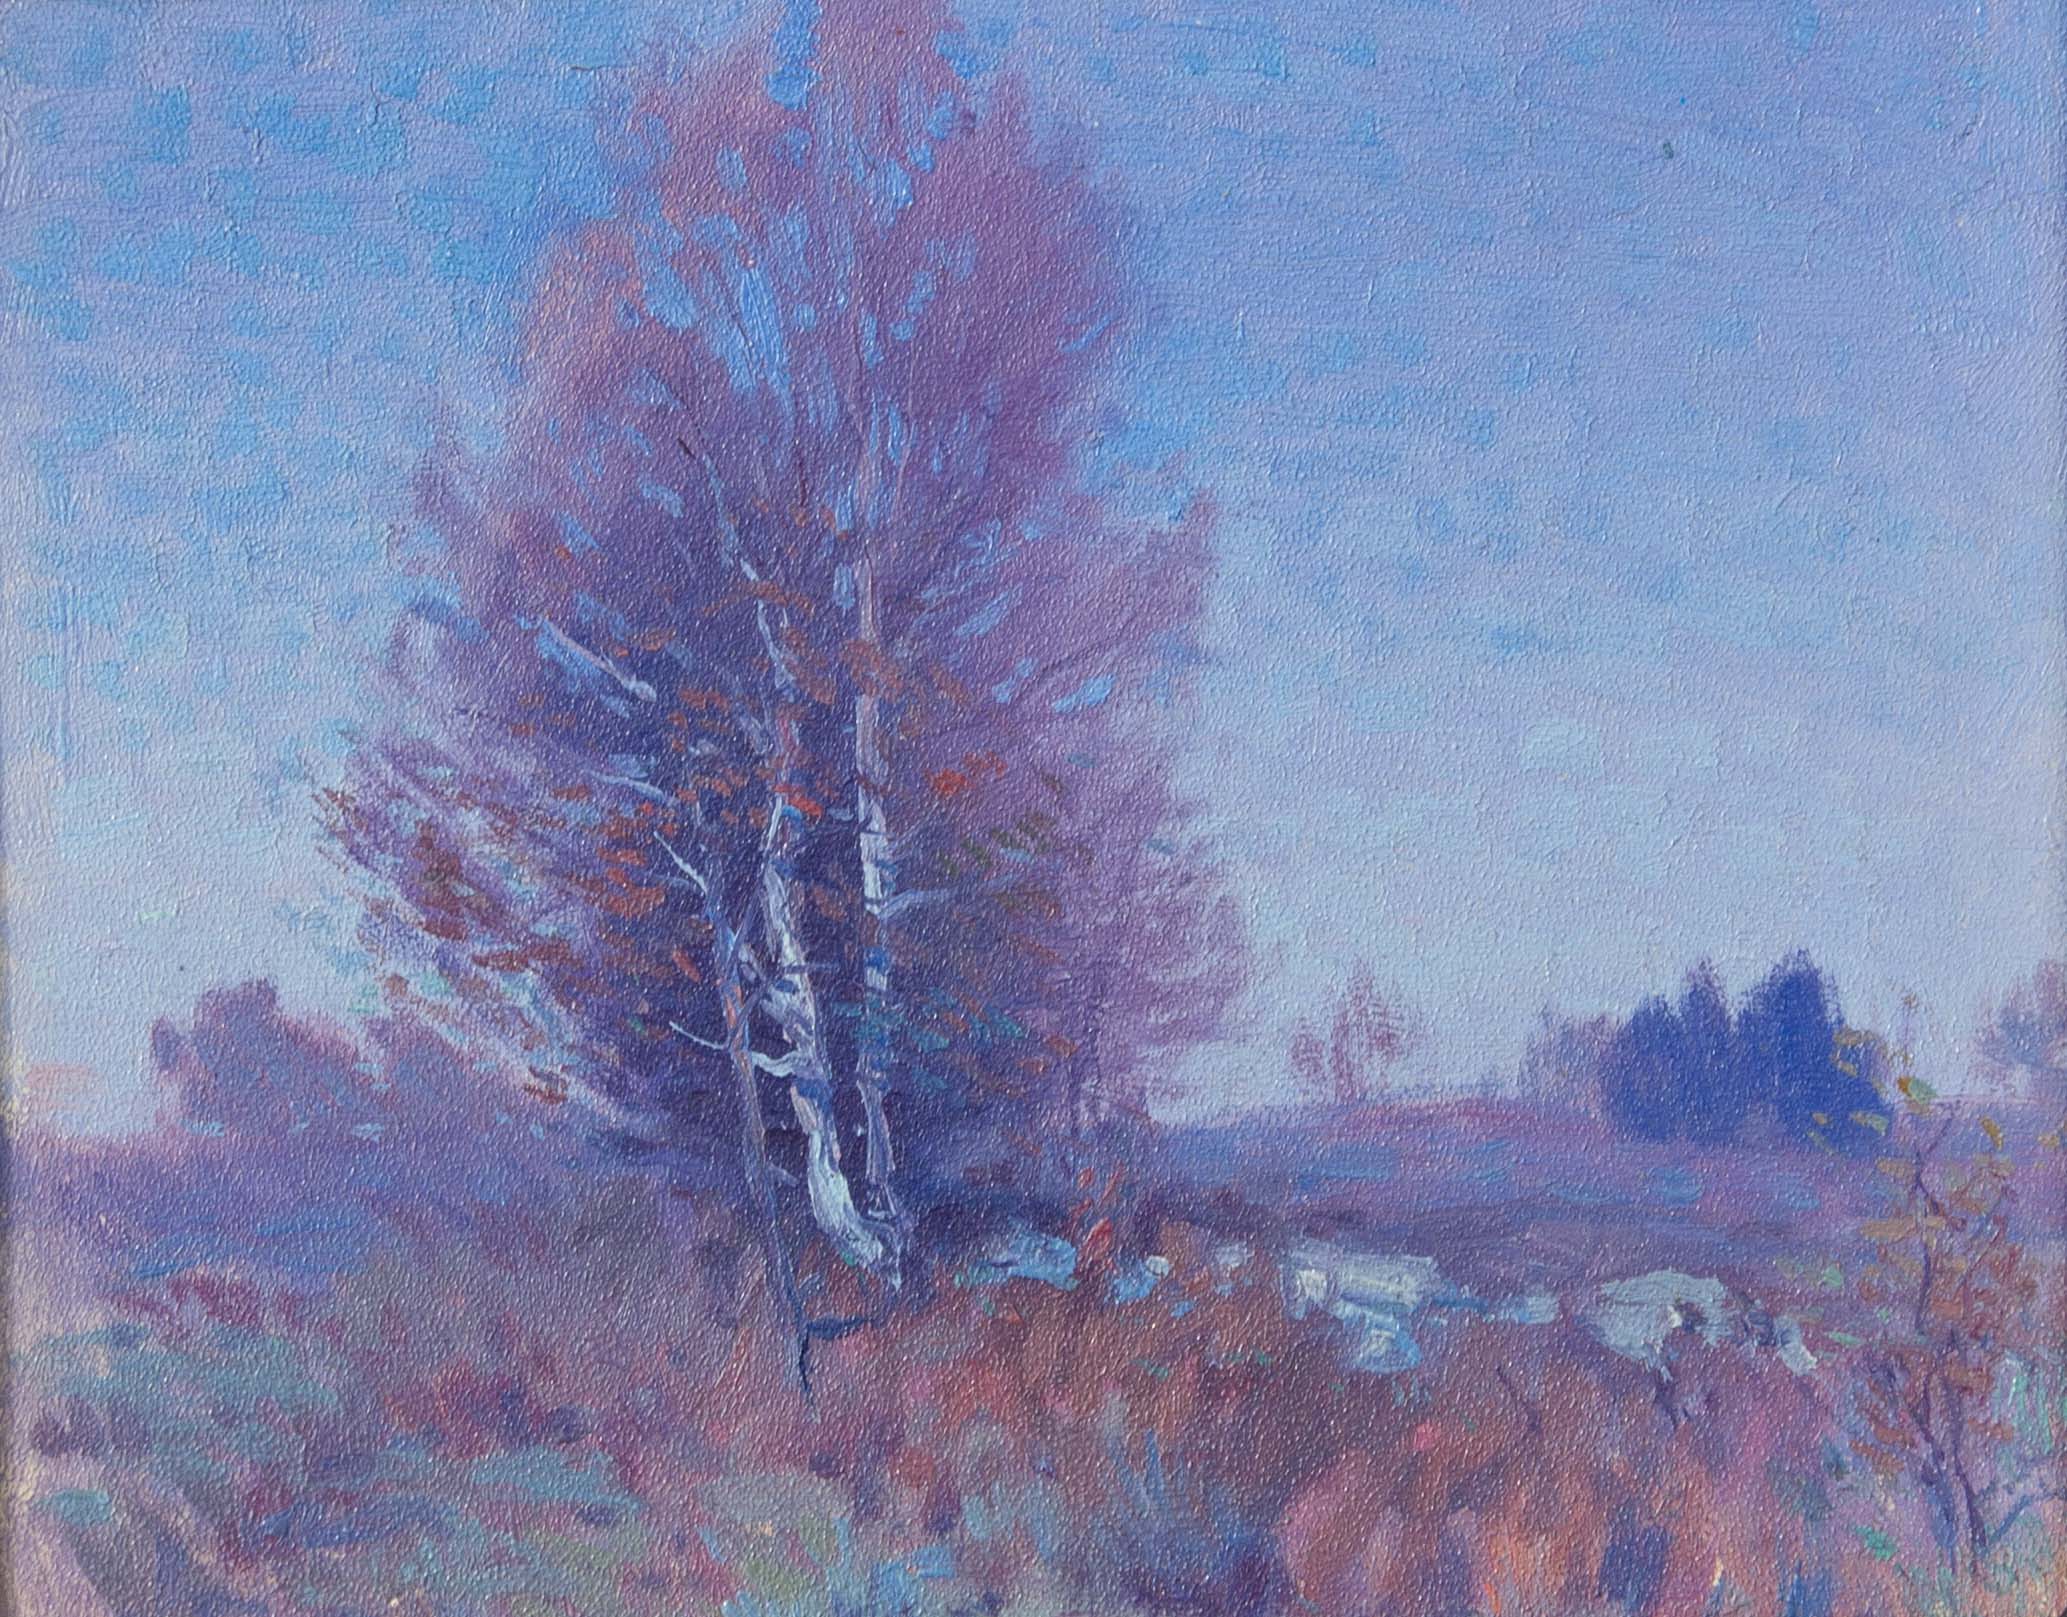 Impressionist landscape by George Renouard. Beautiful blues and mauves. Oil on academy board. Unsigned. Dated on back Oct 18 '16. 
George Renouard, was born in Rochester, New York and lived much of his life in Brooklyn and Manhattan, was a graphic